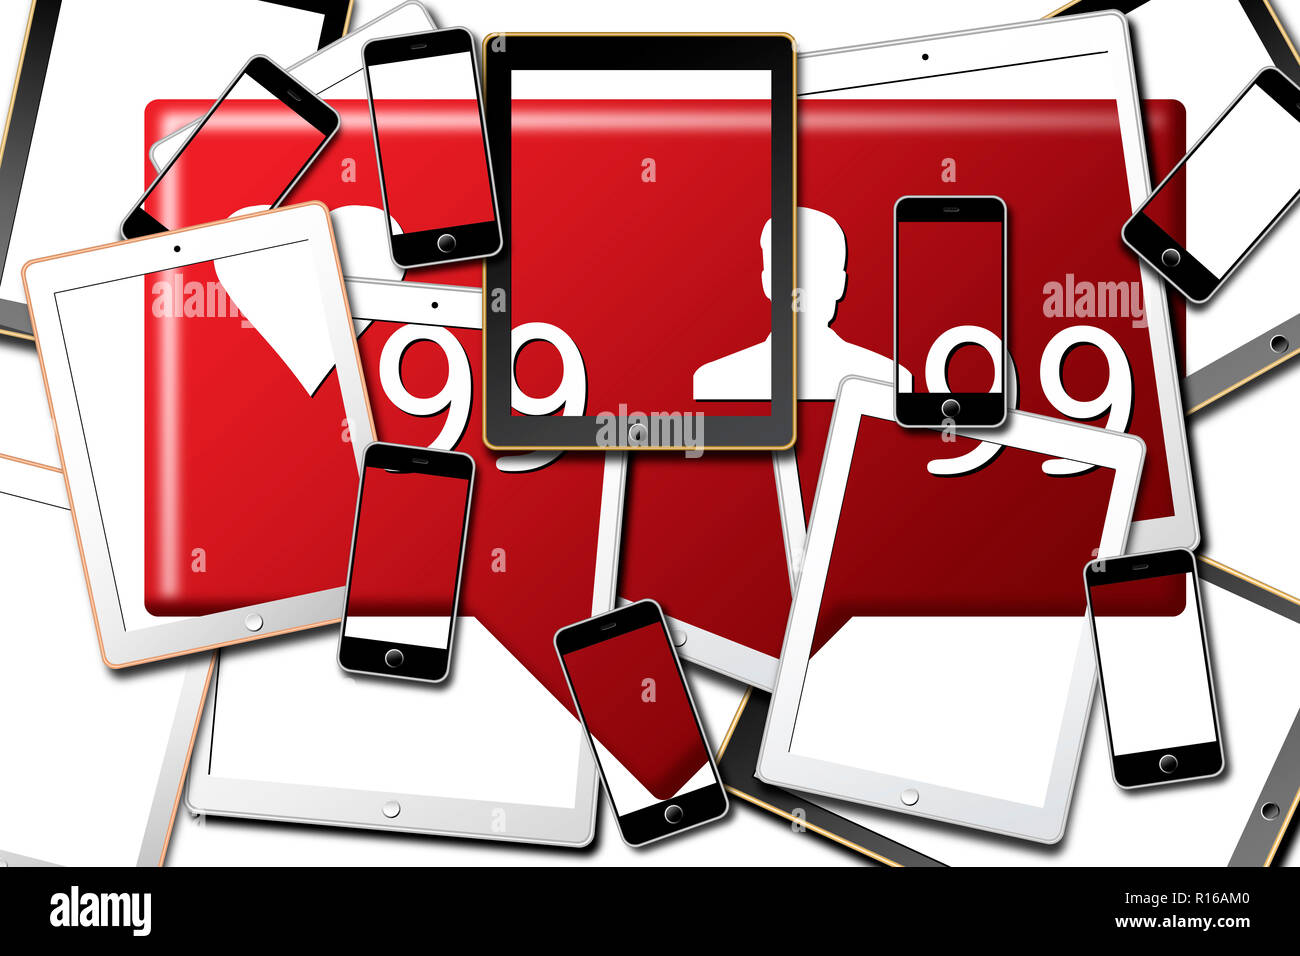 Digital tablets and smartphones overlapping each other with coordinated screens Stock Photo